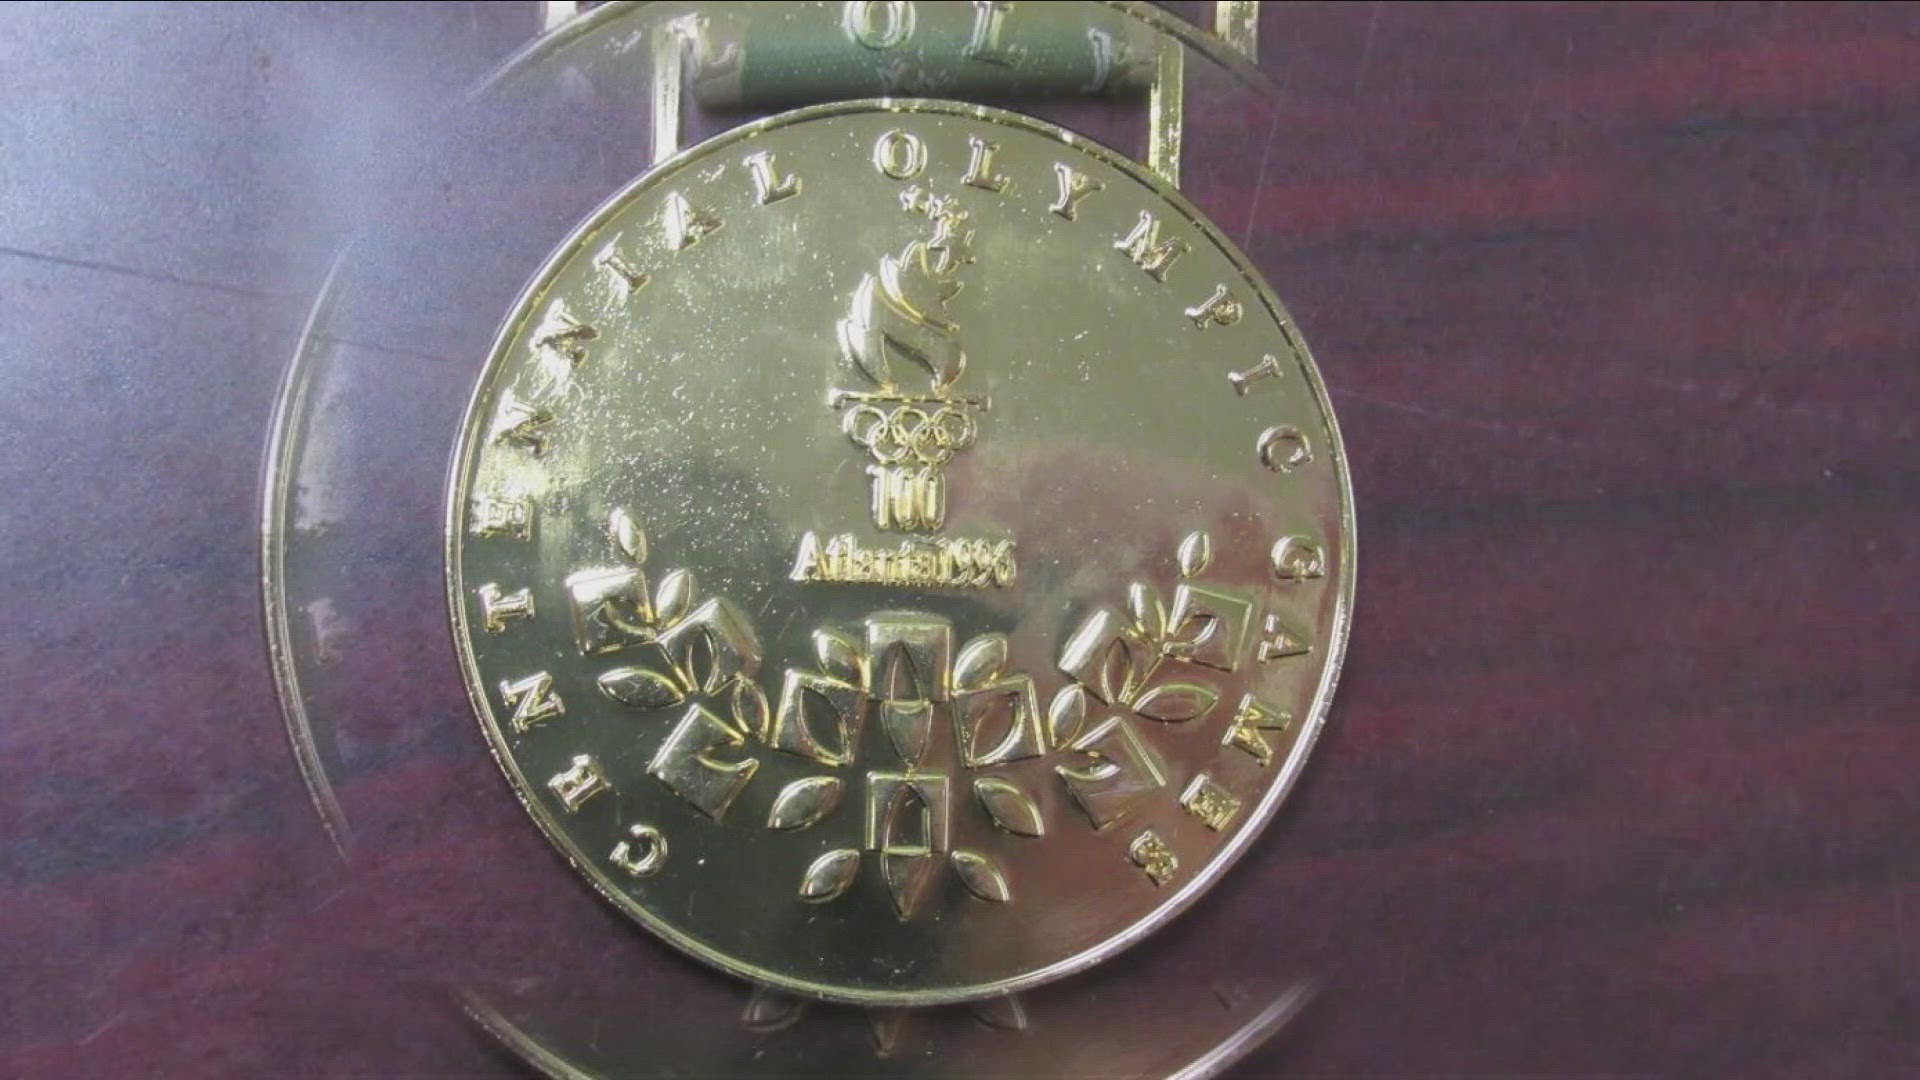 Fake medals were recently seized by U.S. Customs and Border Protection officers in Western New York.